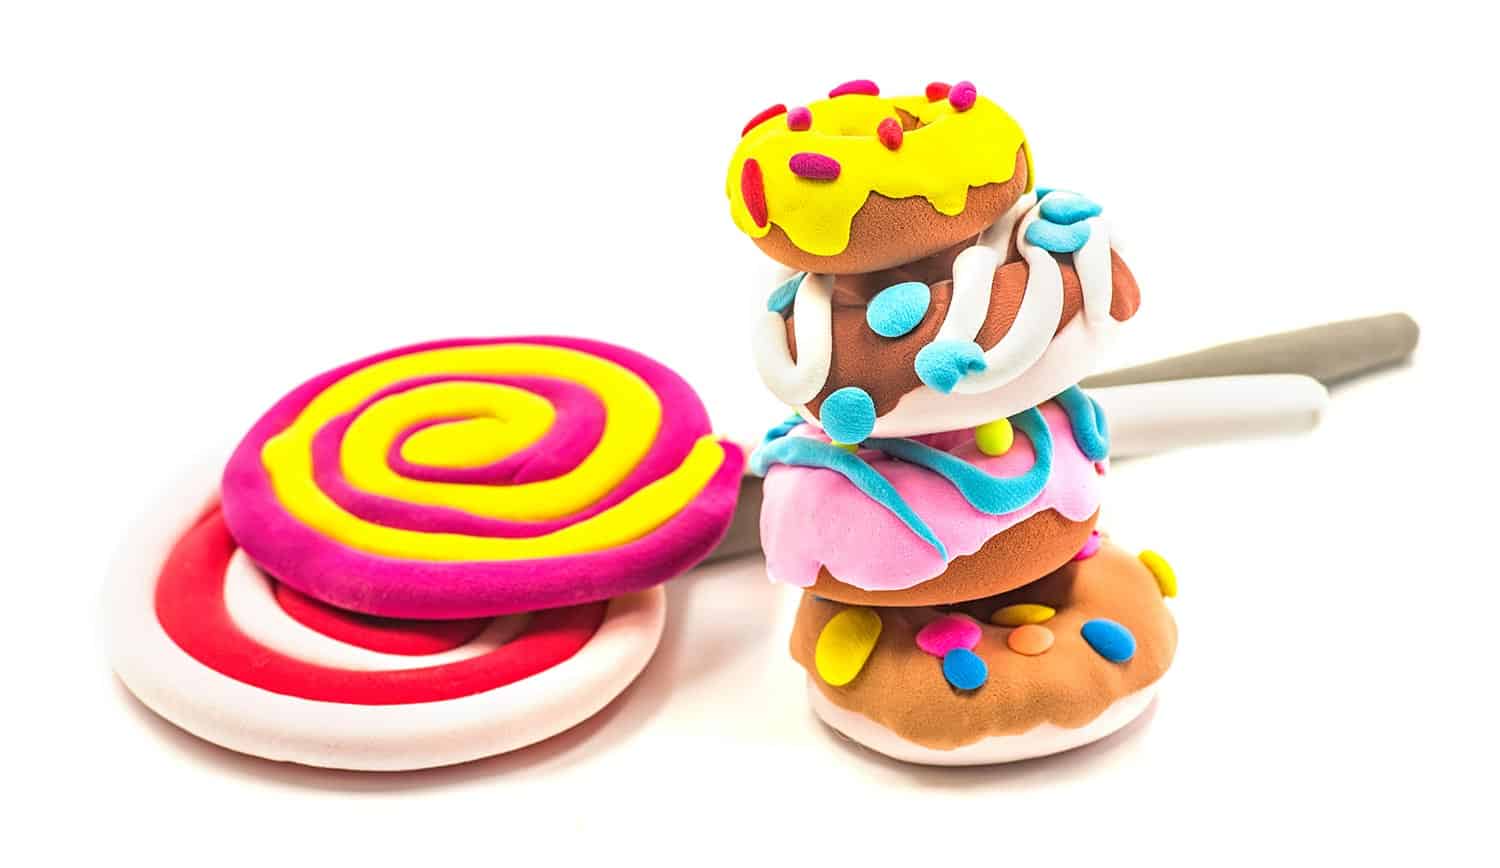 Collection of bright sweets made of plasticine